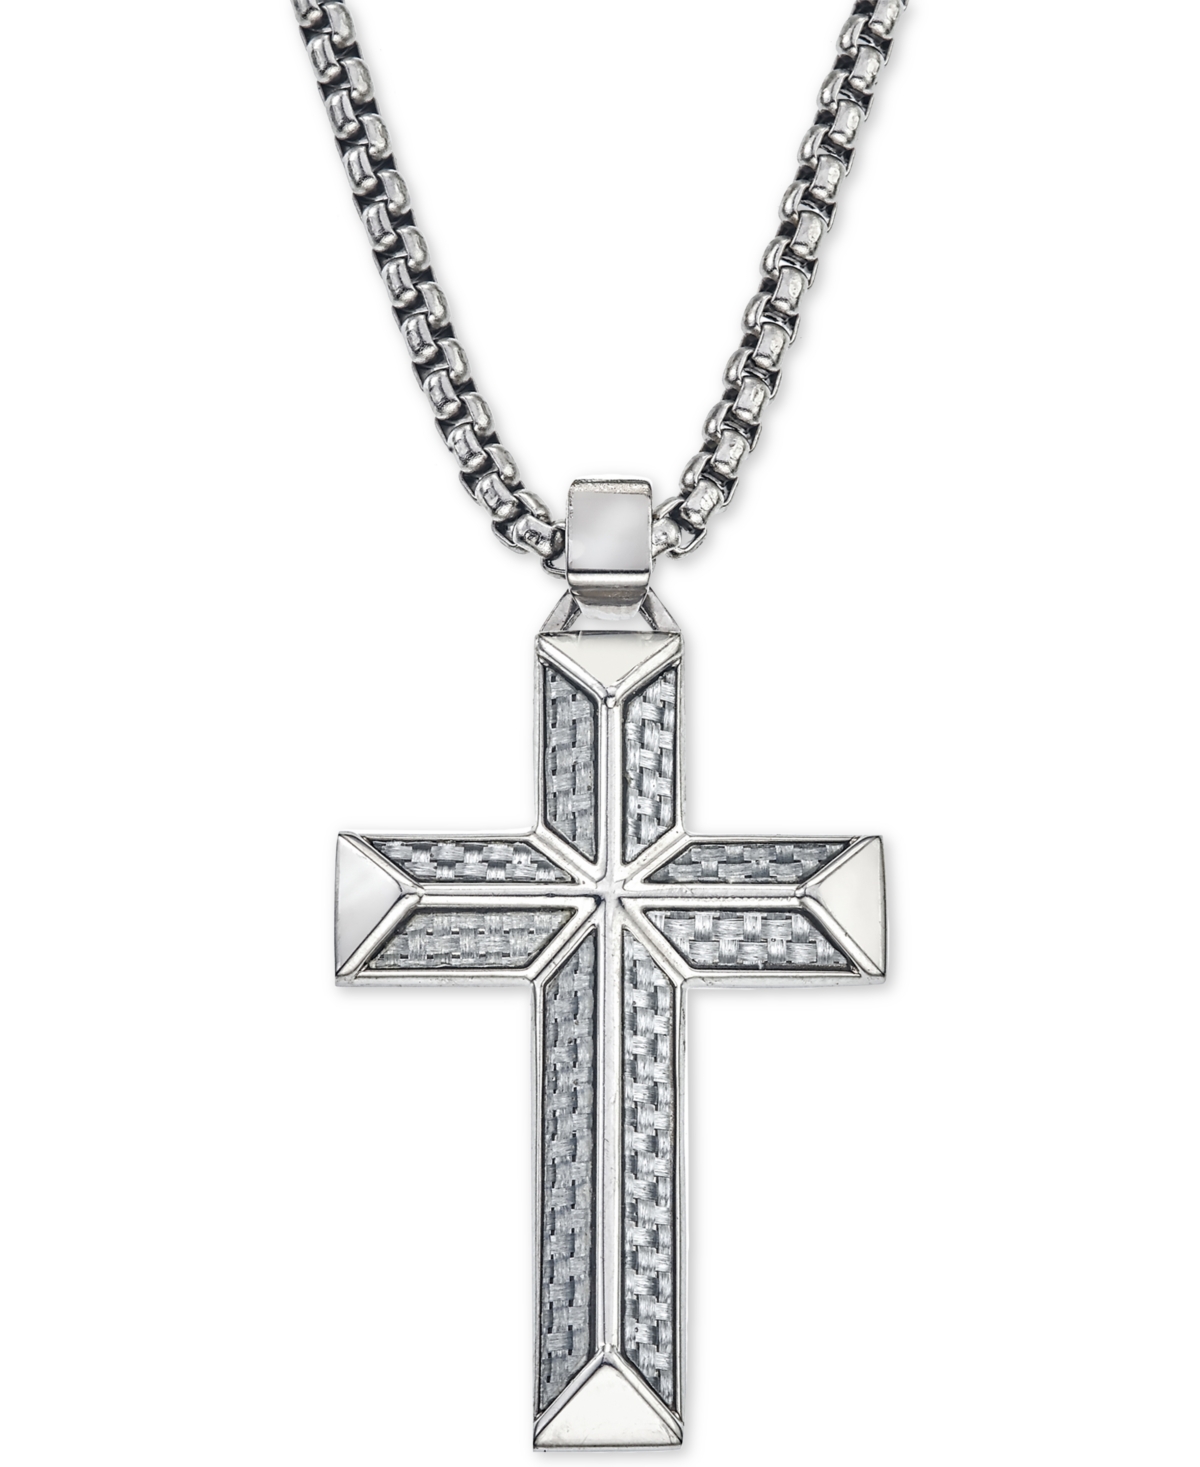 Cross Pendant Necklace in Gray Carbon Fiber and Stainless Steel, Created for Macy's - Stainless Steel